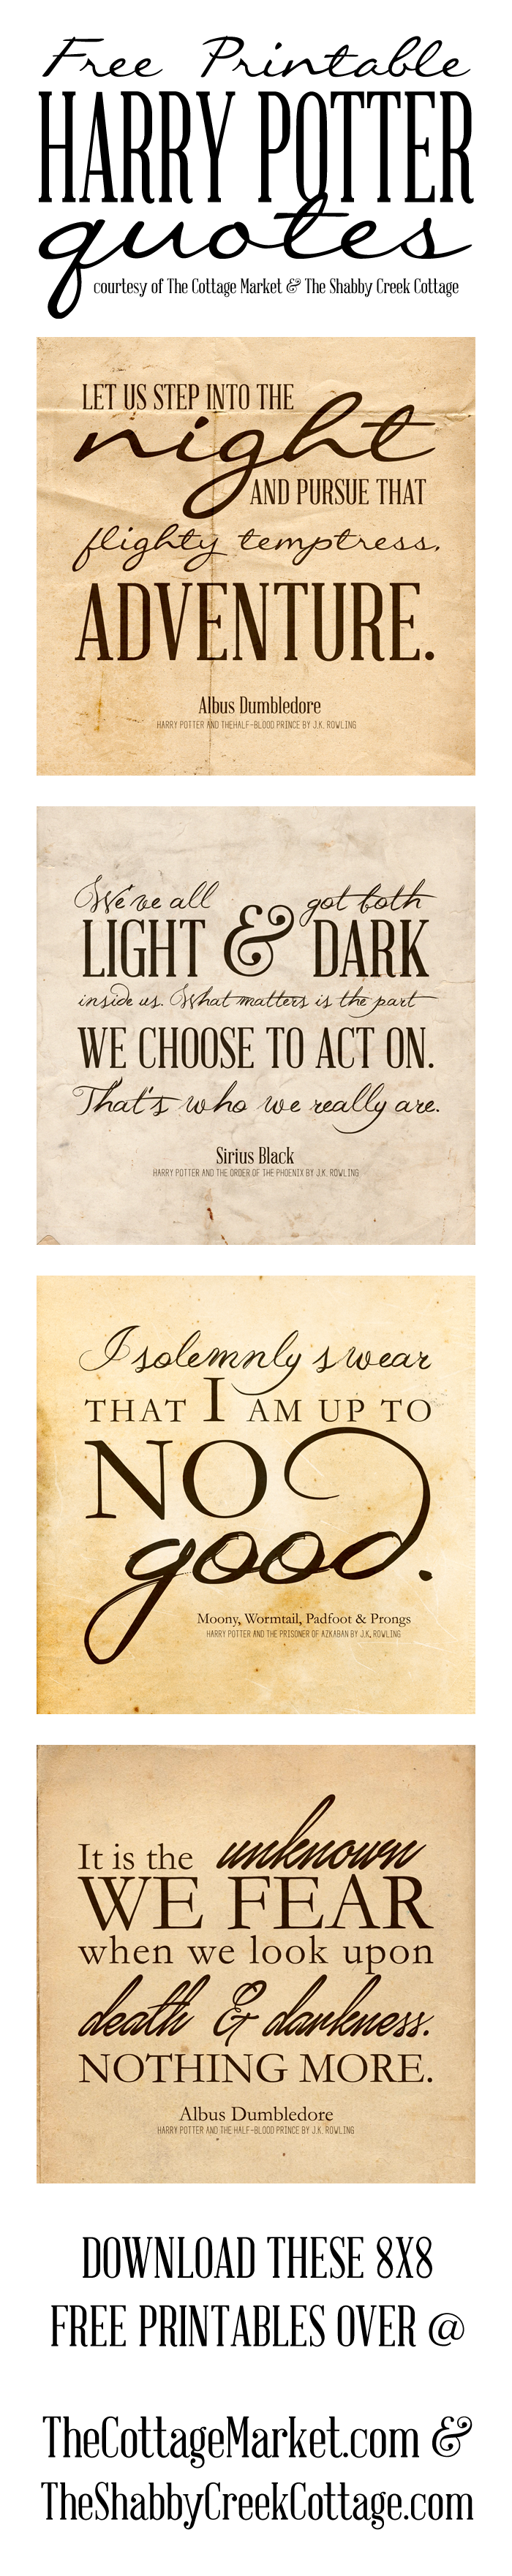 TCM&TSCC-HarryPotter-Quote-Printable-Tower